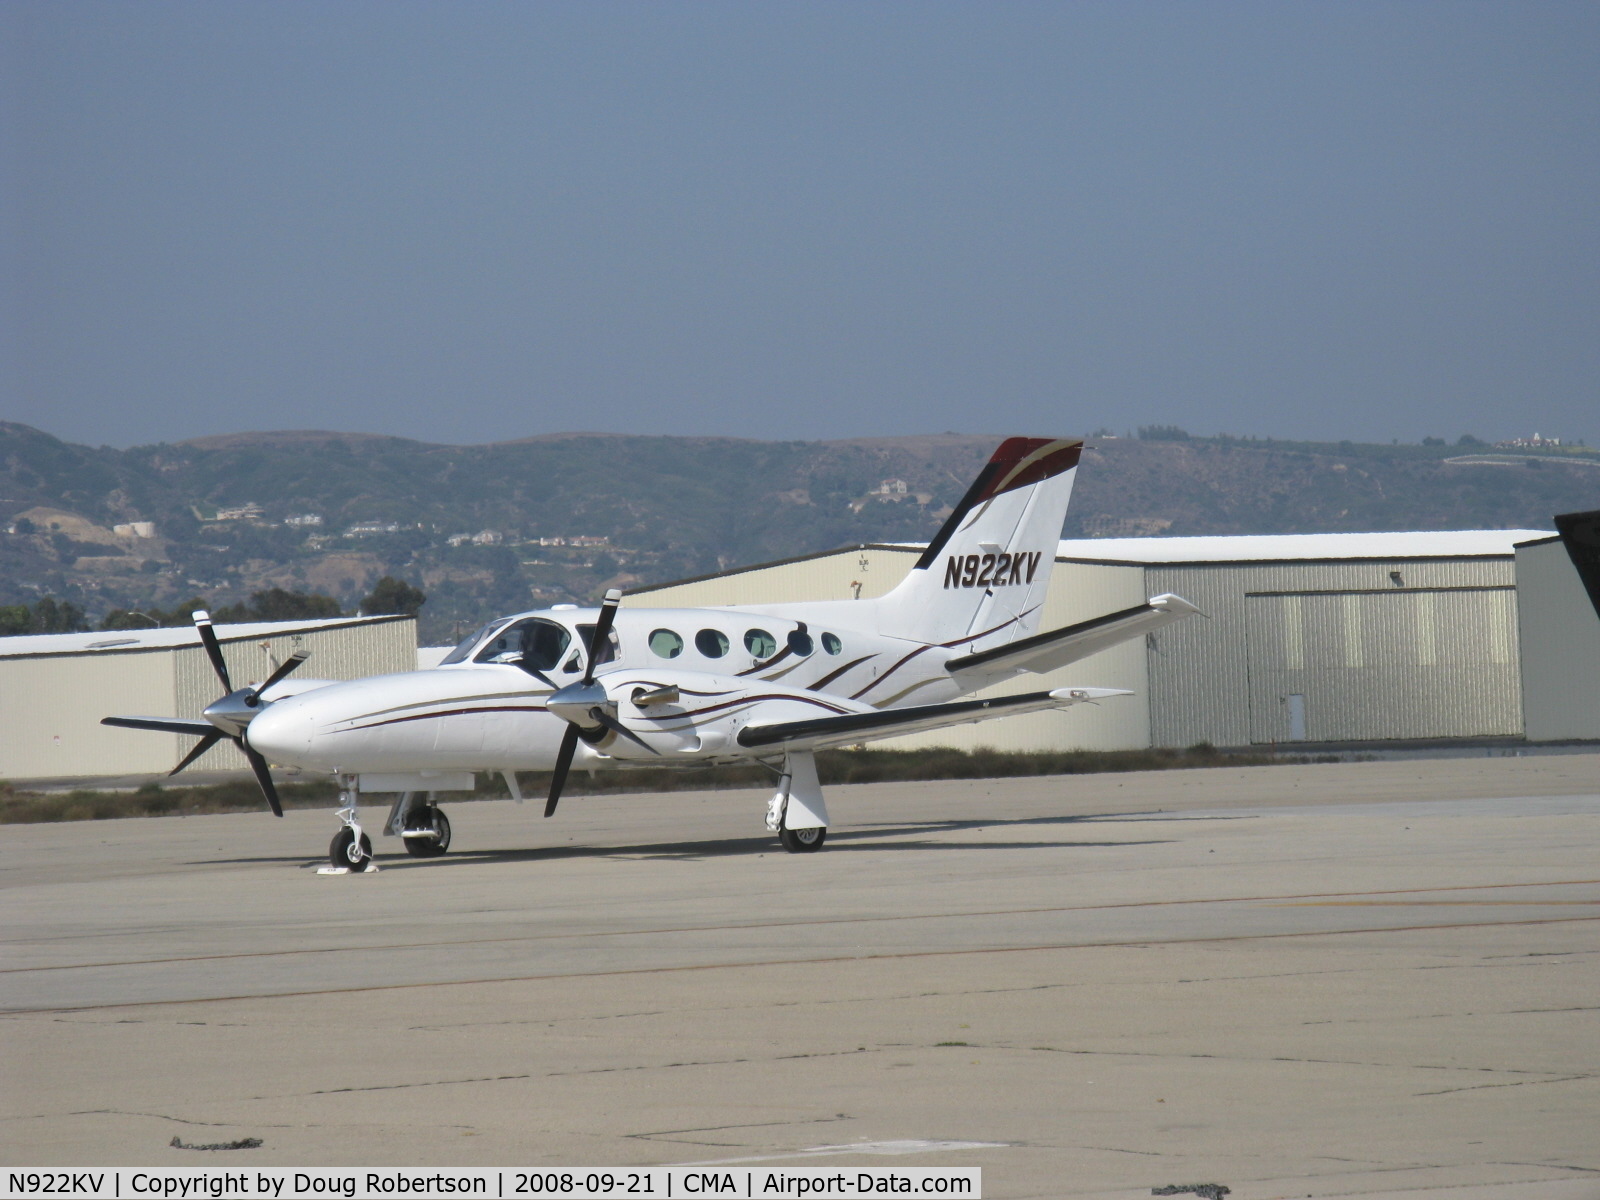 N922KV, 1981 Cessna 425 C/N 425-0052, 1981 Cessna 425 CORSAIR, two P&W PT6A-60A Turboprops flat rated to 450 Hp each, pressurized cabin